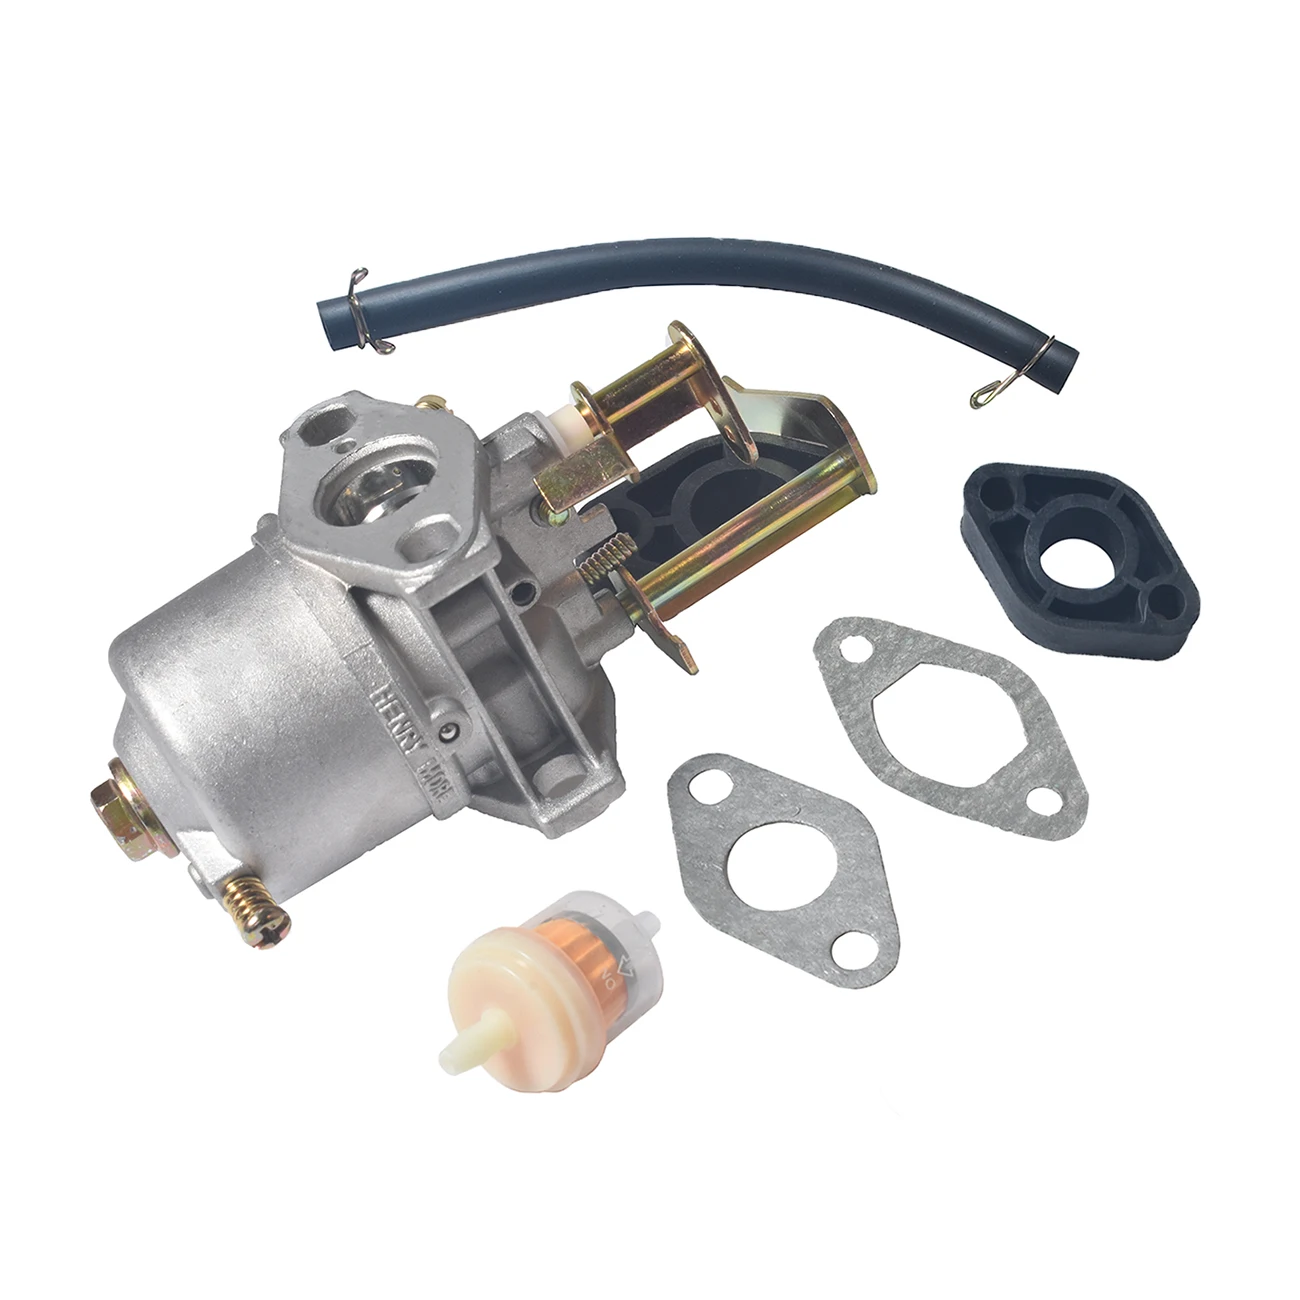 

Carburetor Fit Carb Compatible With Coleman Powersports 98cc 3HP CT100U Gas Mini Trail Bike Scooter